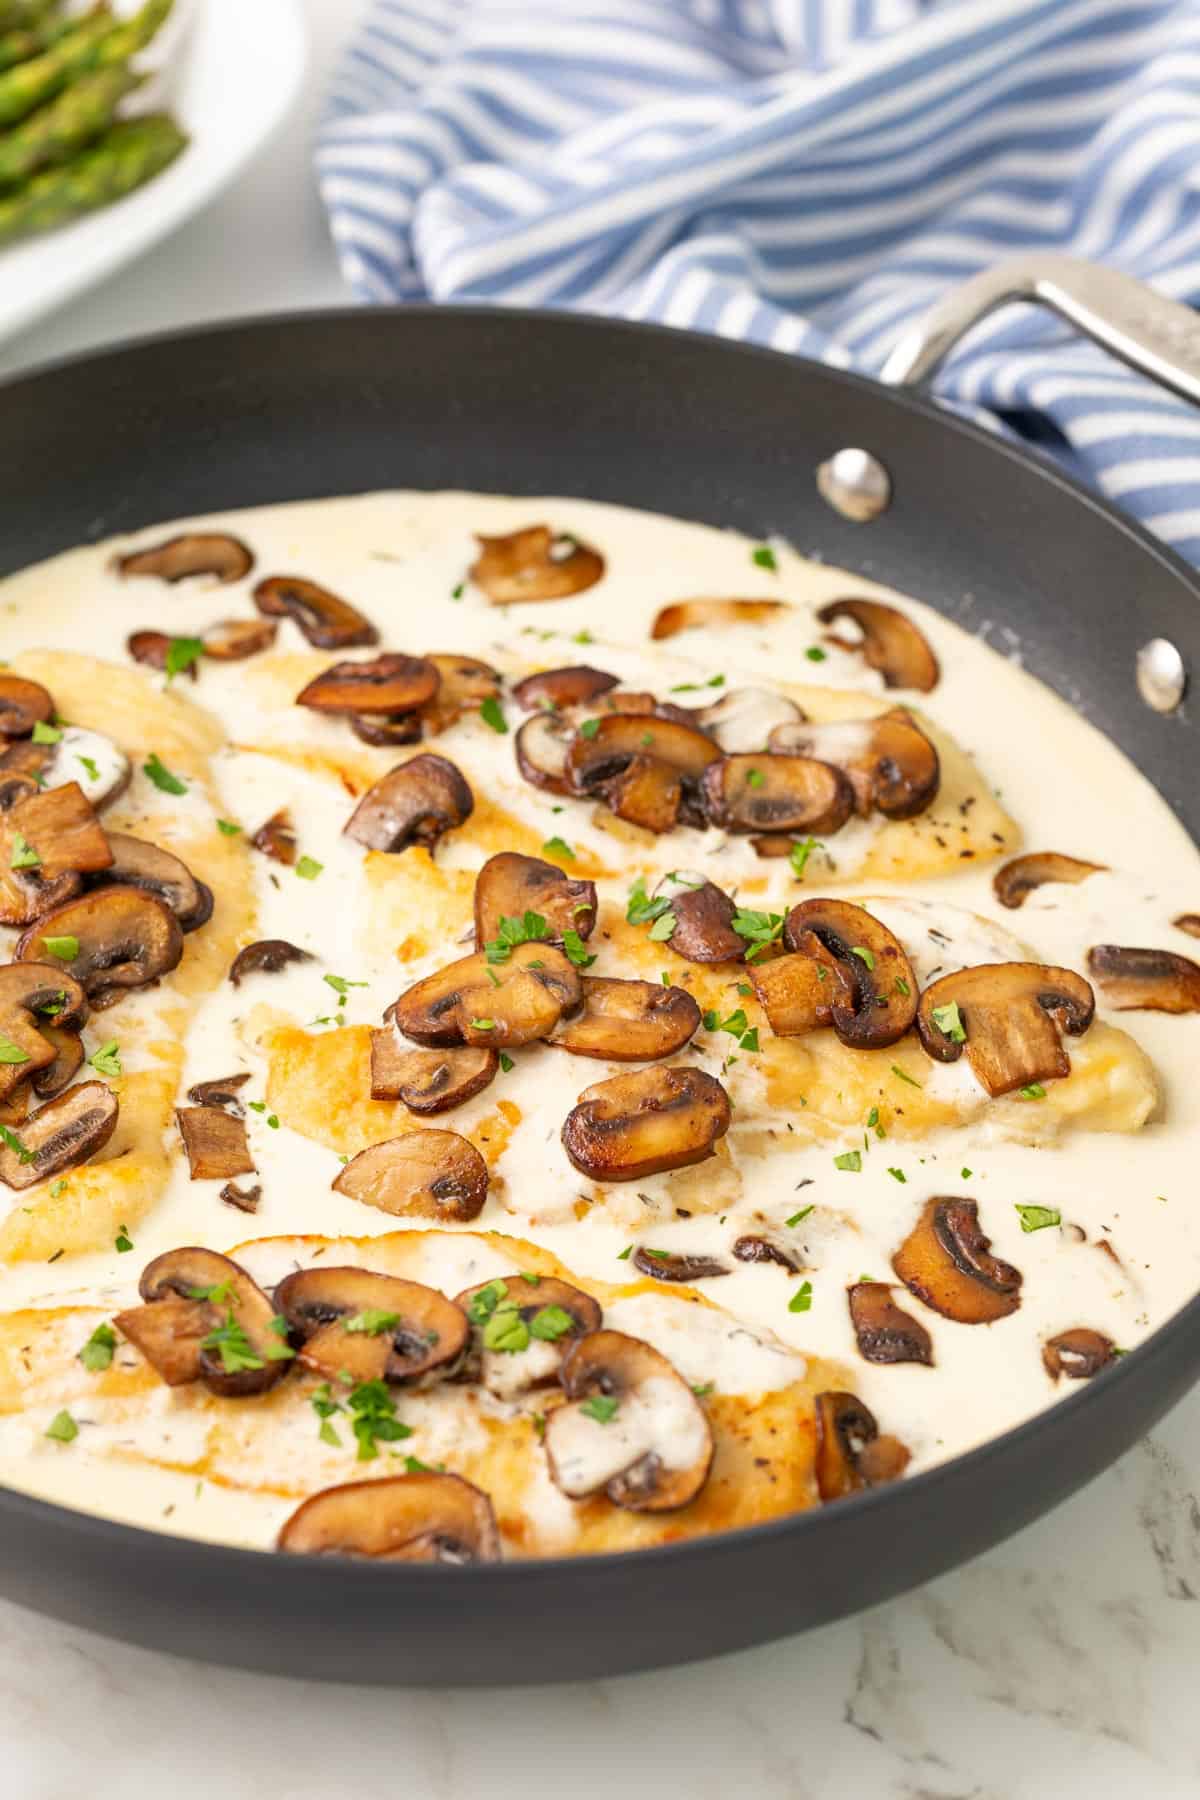 Chicken breasts in a skillet with creamy mushroom sauce.